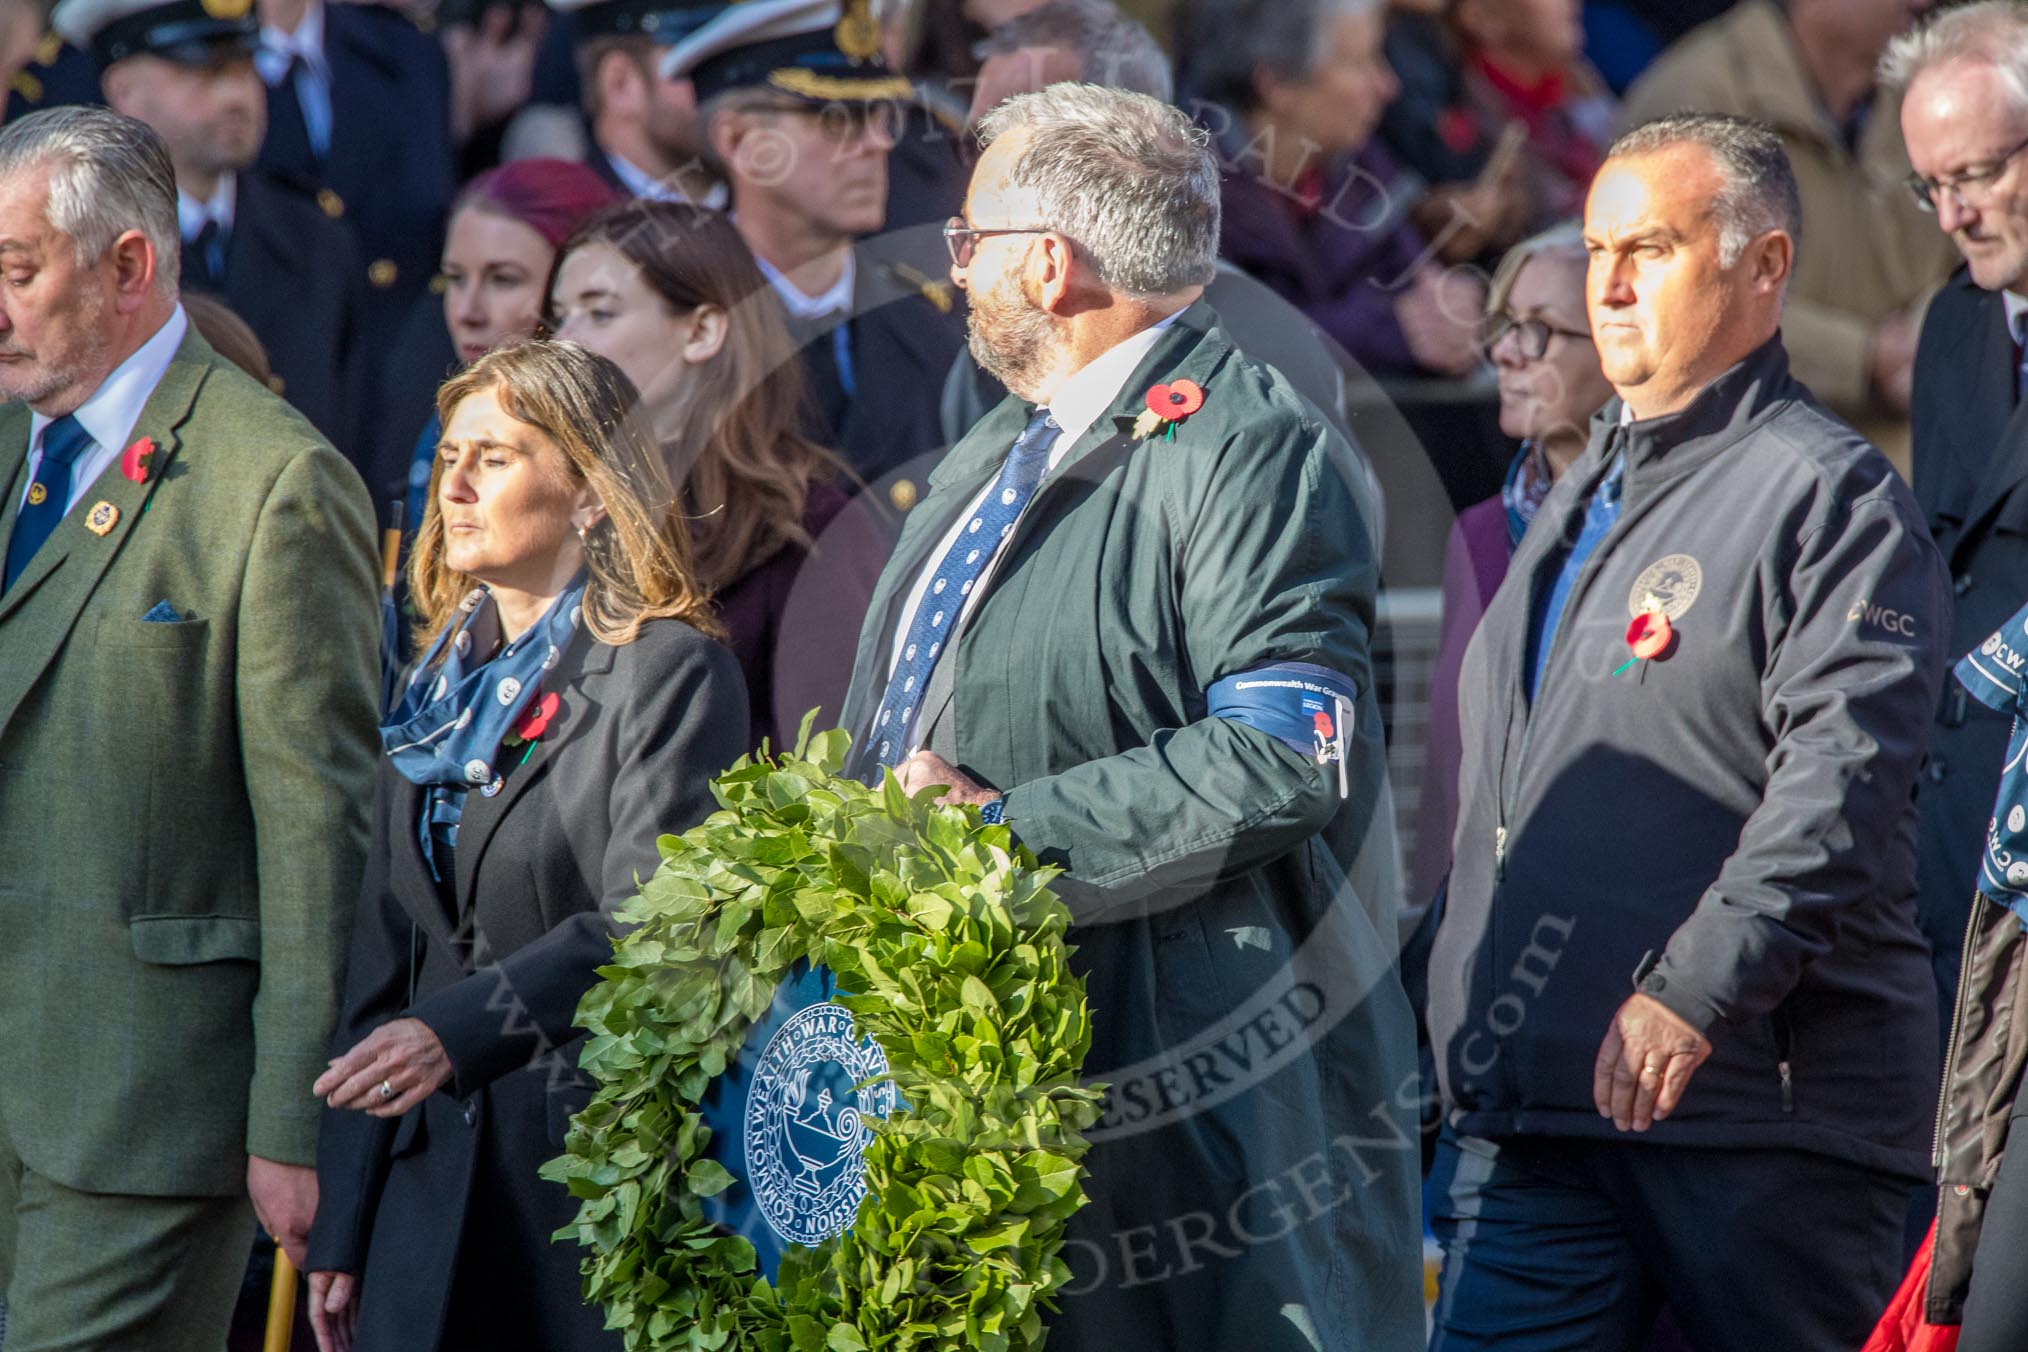 Commonwealth War Graves Commission (Group M50, 19 members) during the Royal British Legion March Past on Remembrance Sunday at the Cenotaph, Whitehall, Westminster, London, 11 November 2018, 12:31.